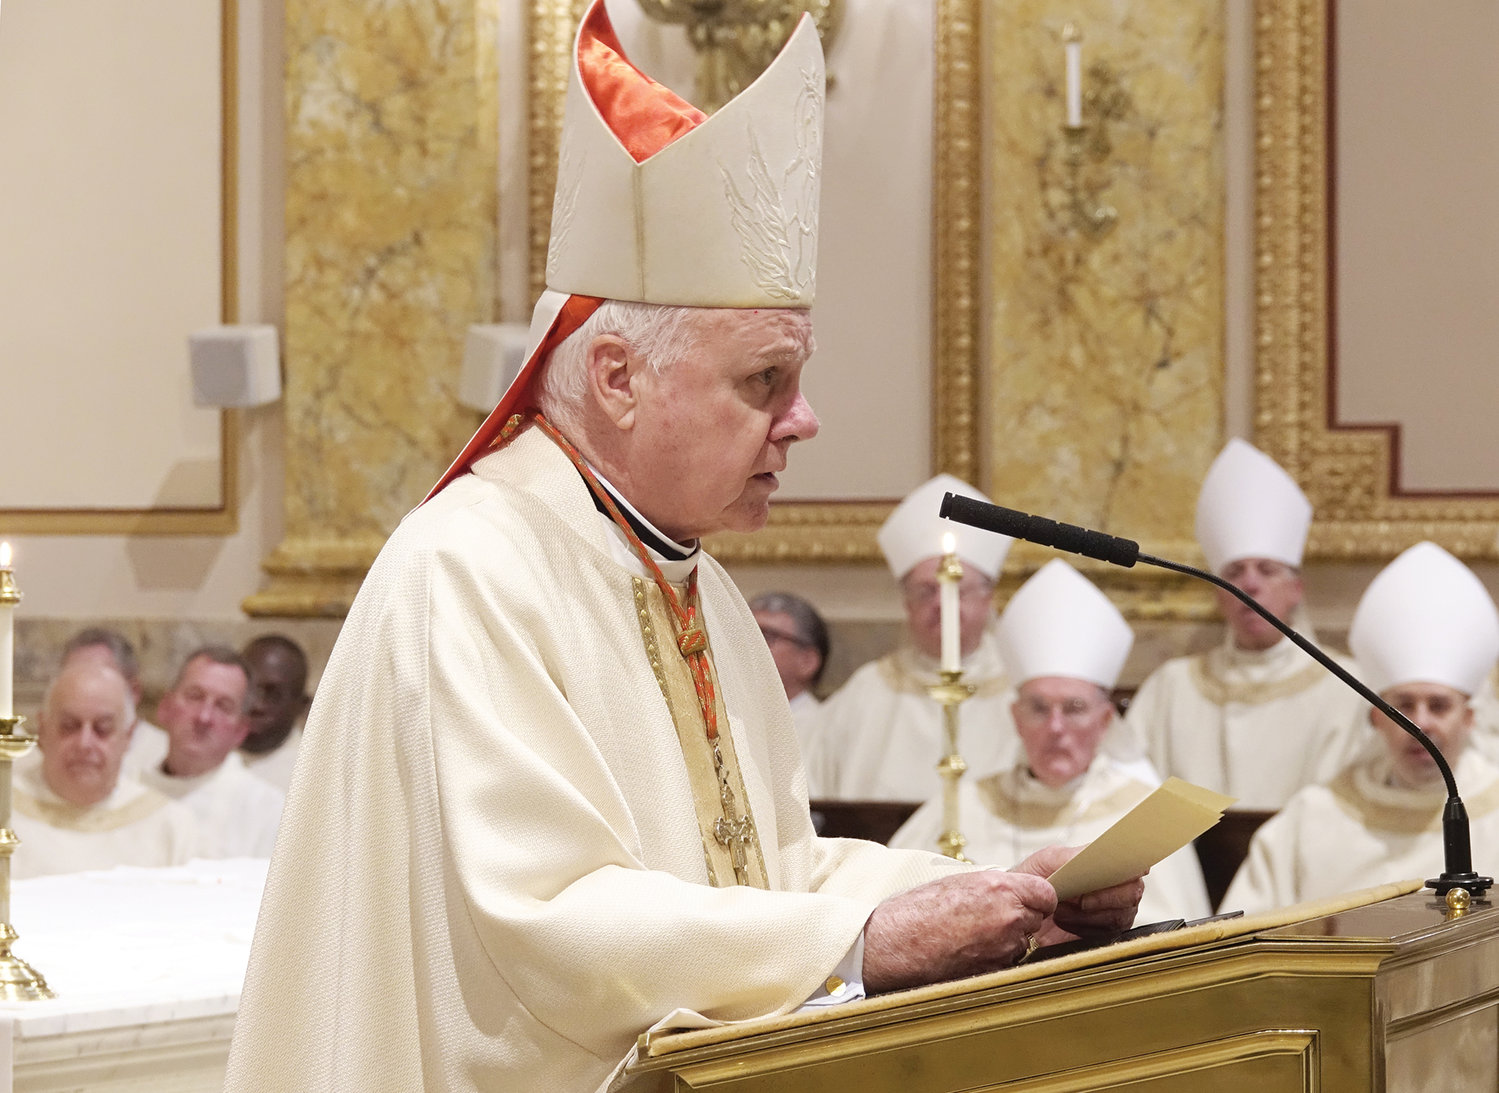 Cardinal Edwin O’Brien, retired Archbishop of Baltimore and a former rector of St. Joseph’s Seminary, delivers the homily.